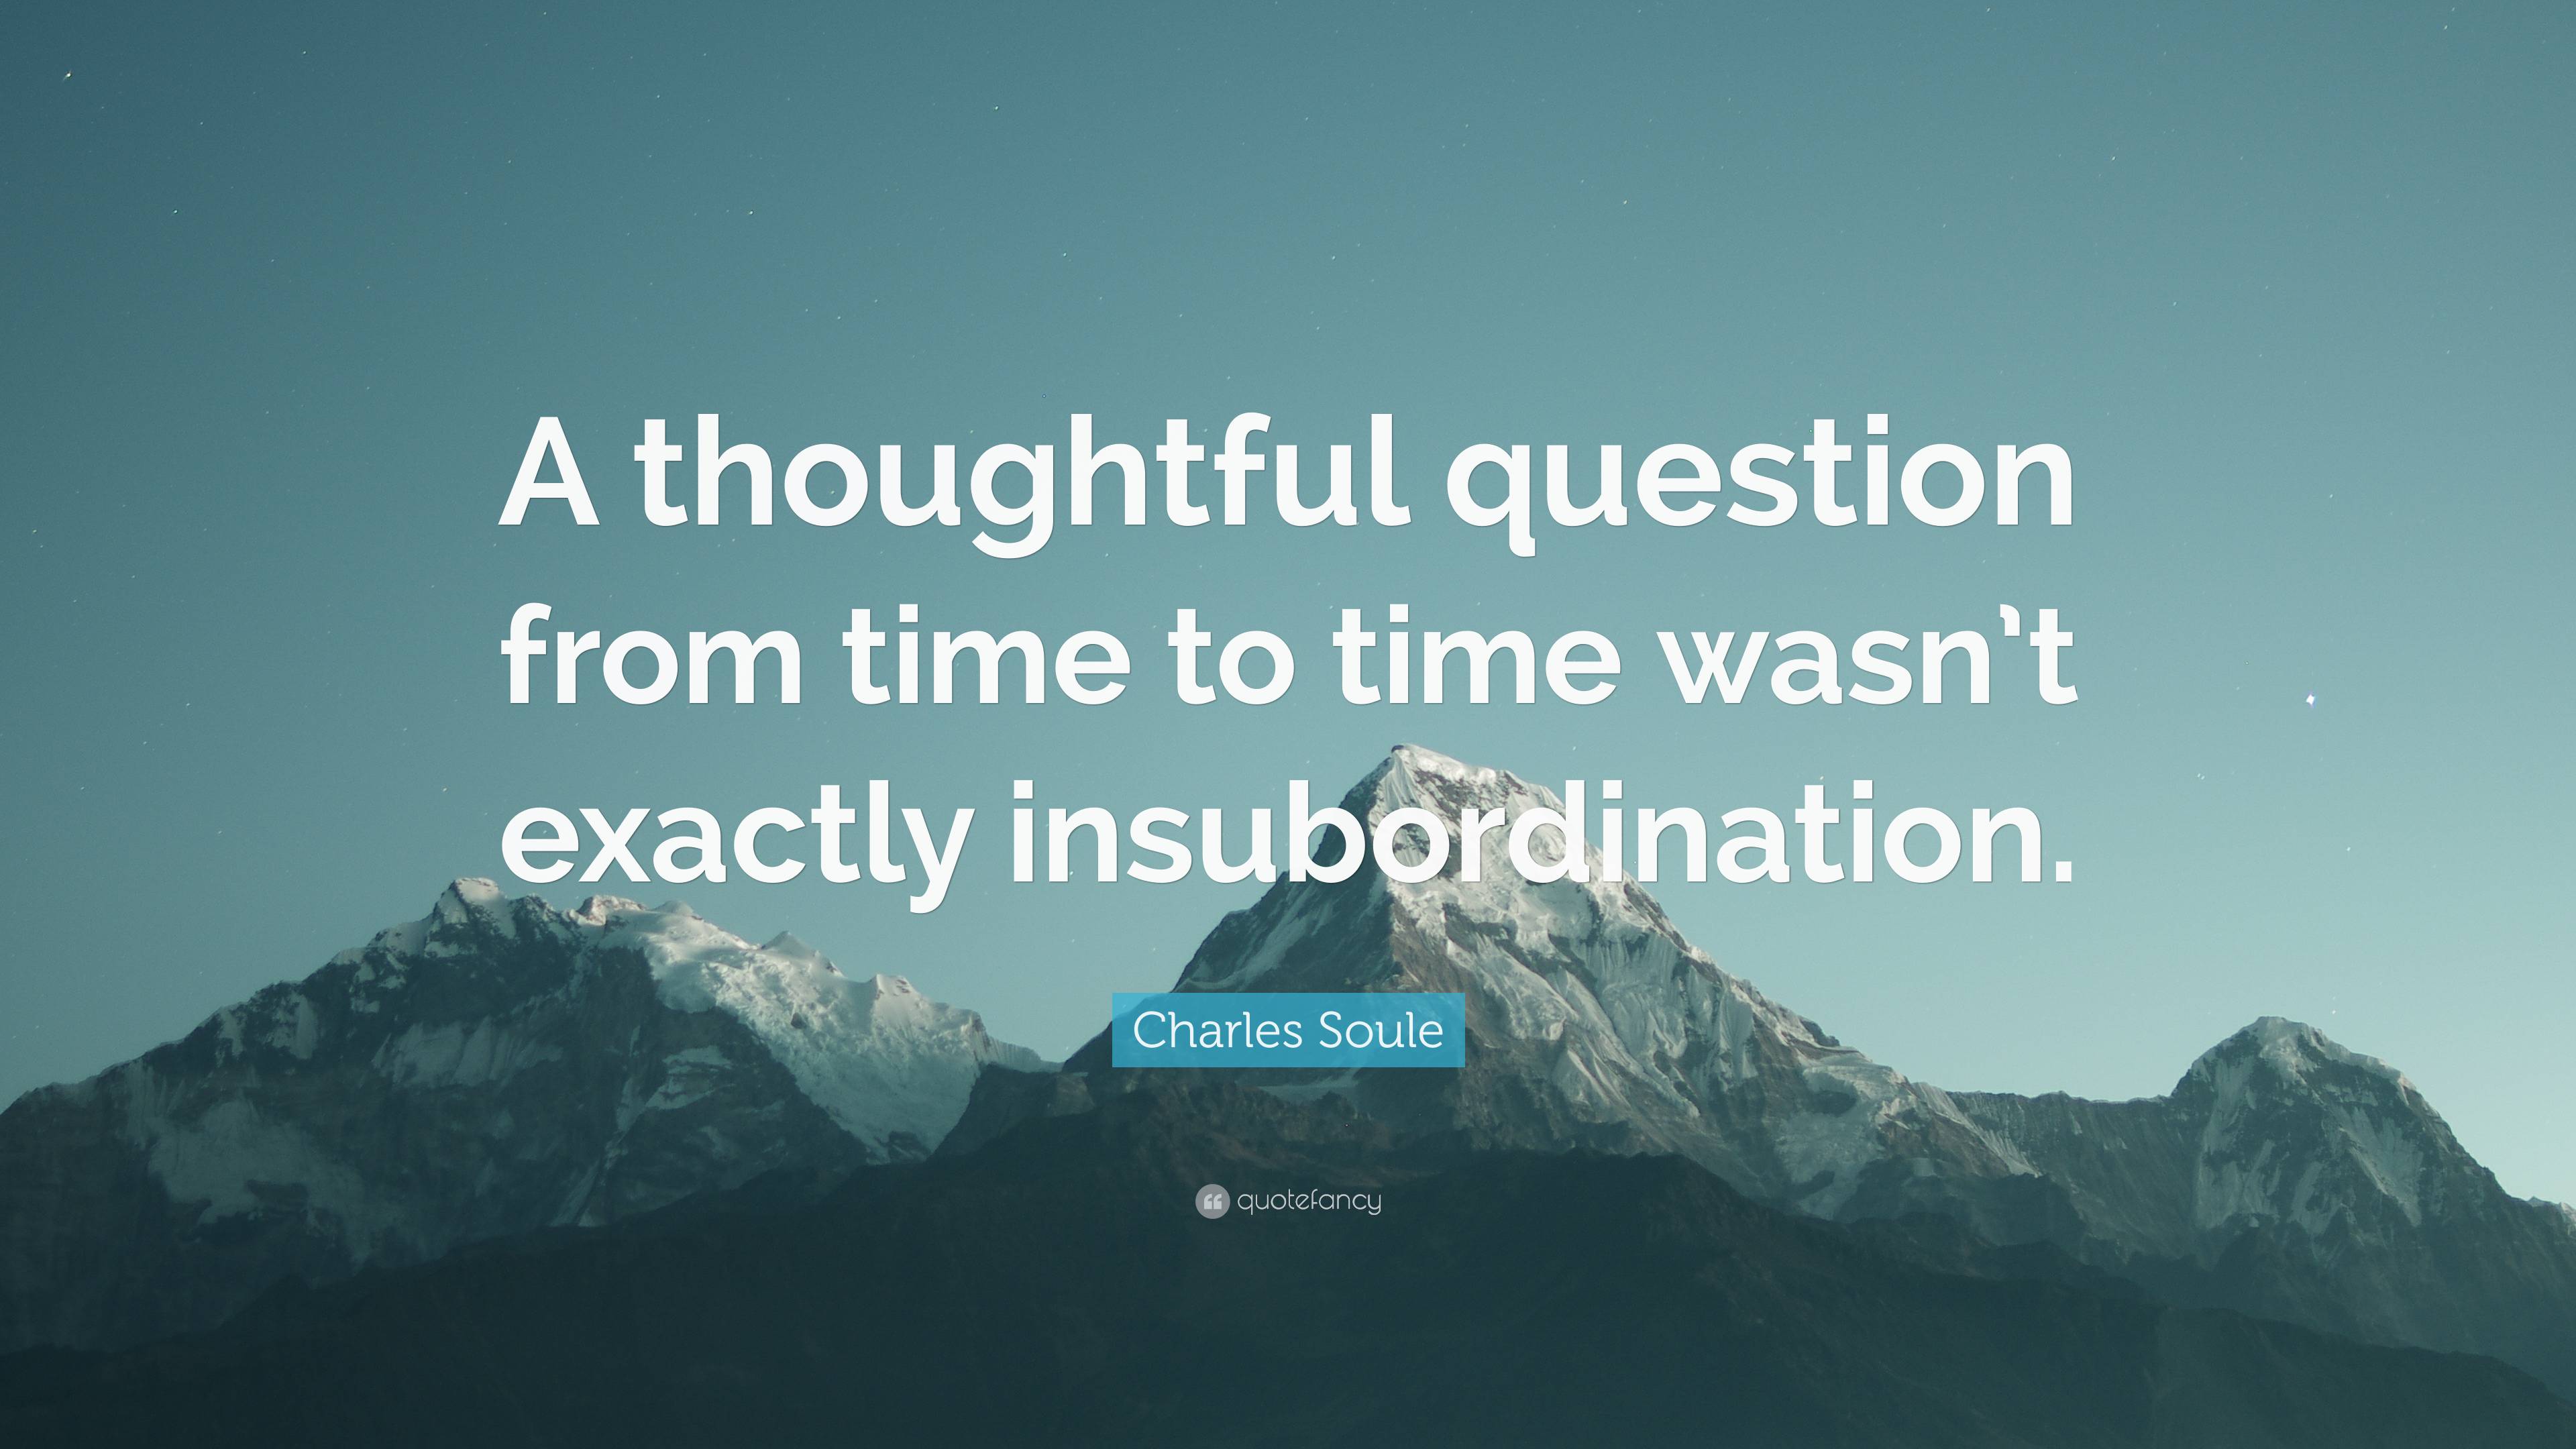 Charles Soule Quote: “A thoughtful question from time to time wasn